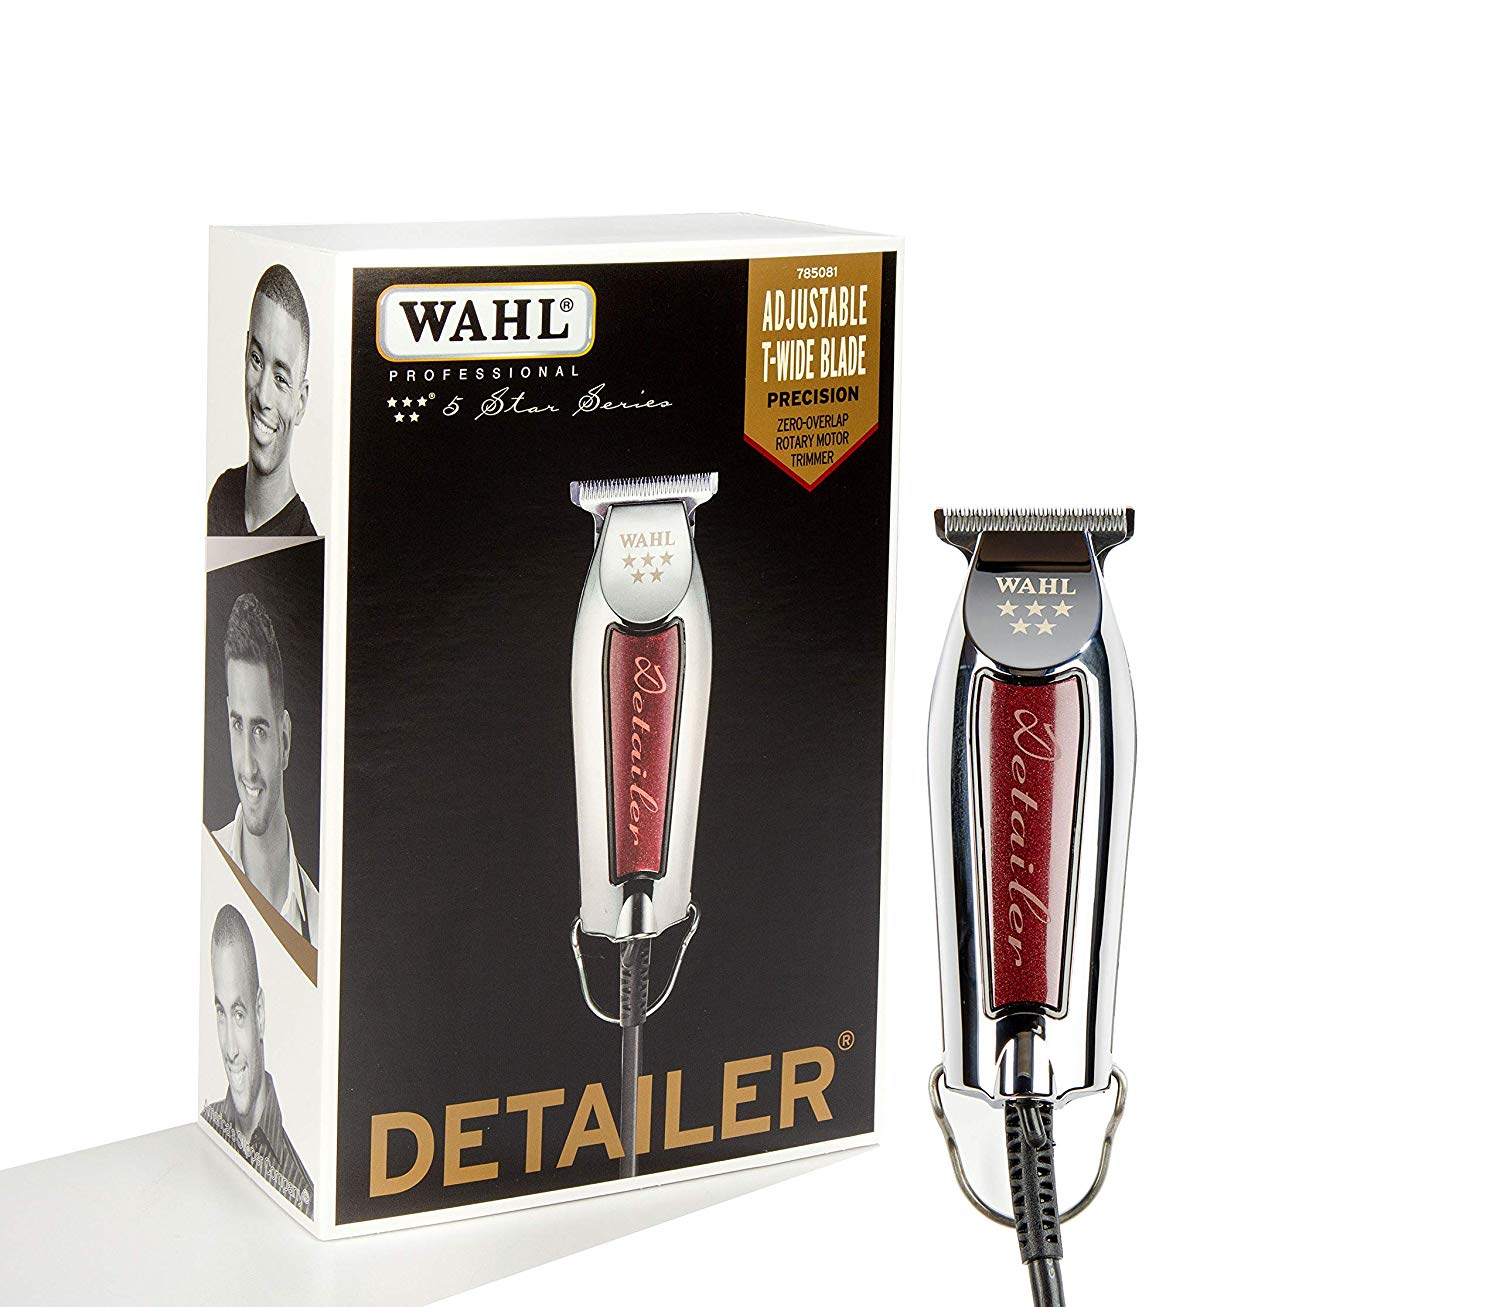 Wahl 5 Star Detailer Trimmer Silver/Red #8081 | Palms Fashion Inc.